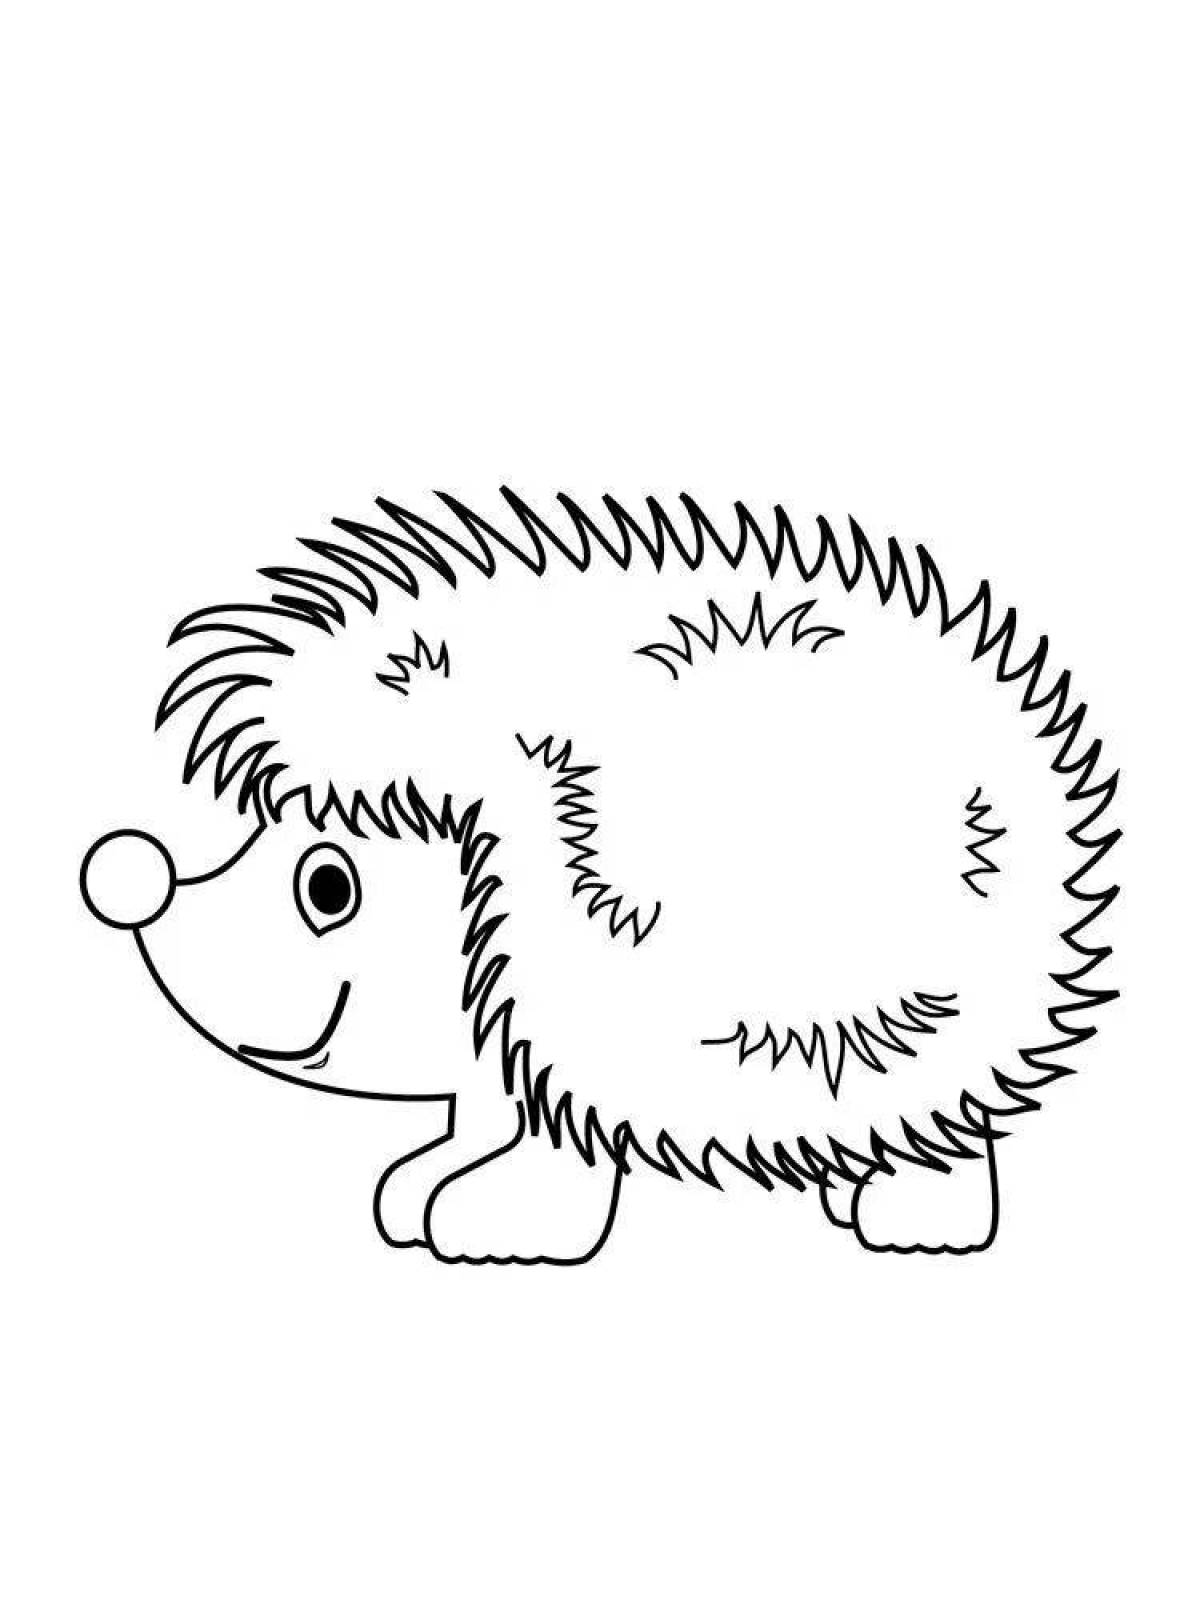 Outstanding hedgehog coloring book for 2-3 year olds